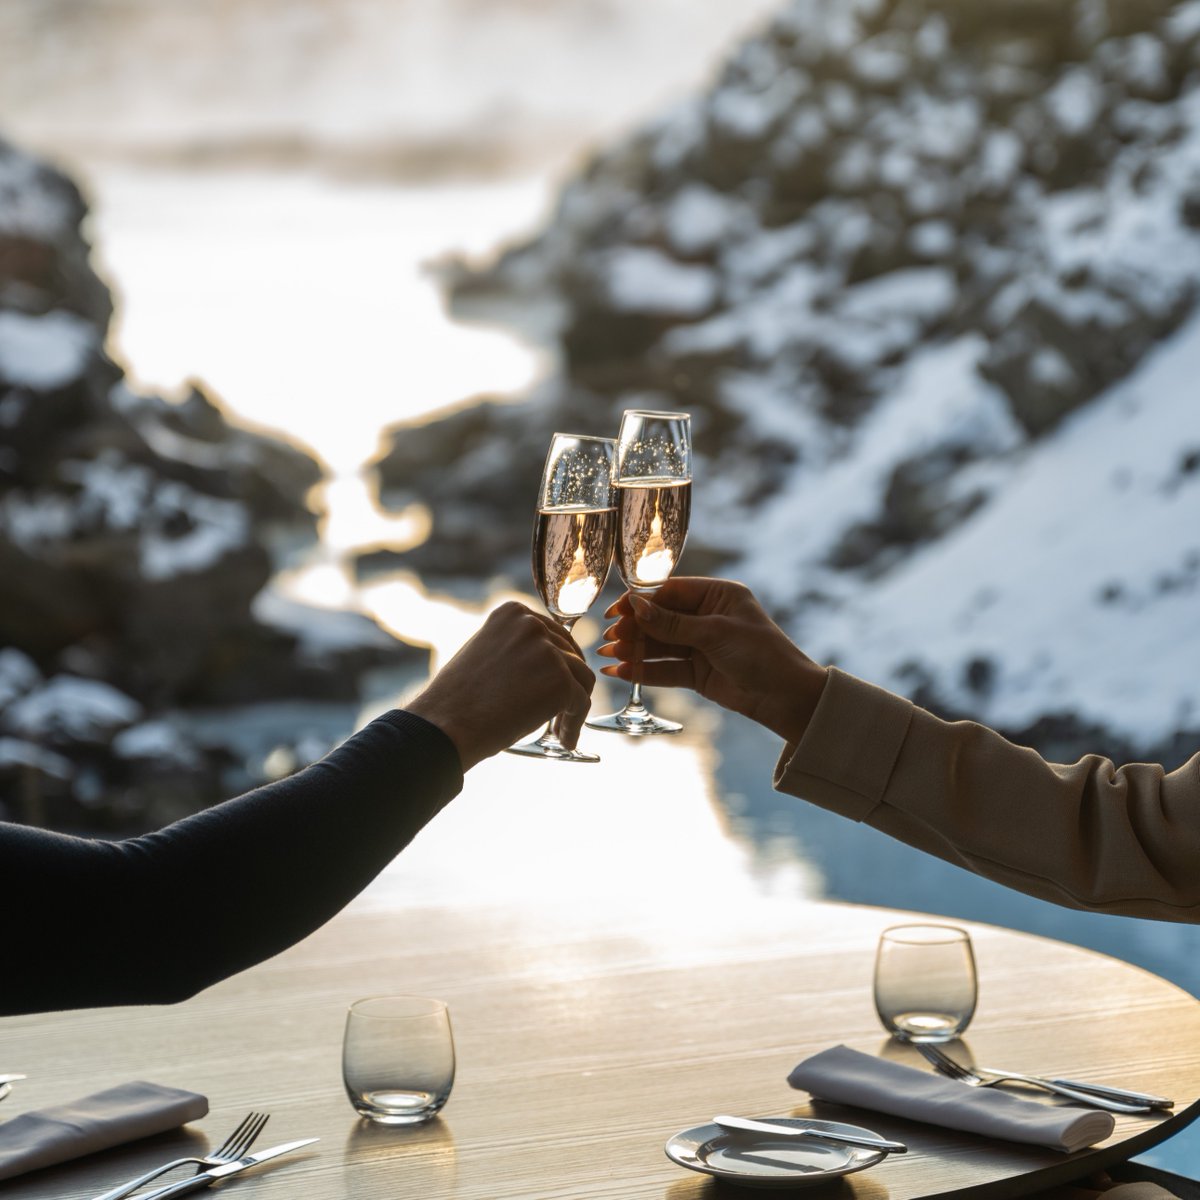 This is your reminder to reserve a table at Lava Restaurant for your next visit to Blue Lagoon! There's nothing quite like dining on the shores of a wonder of the world. 🩵 #LavaRestaurant #BlueLagoonIceland #Iceland